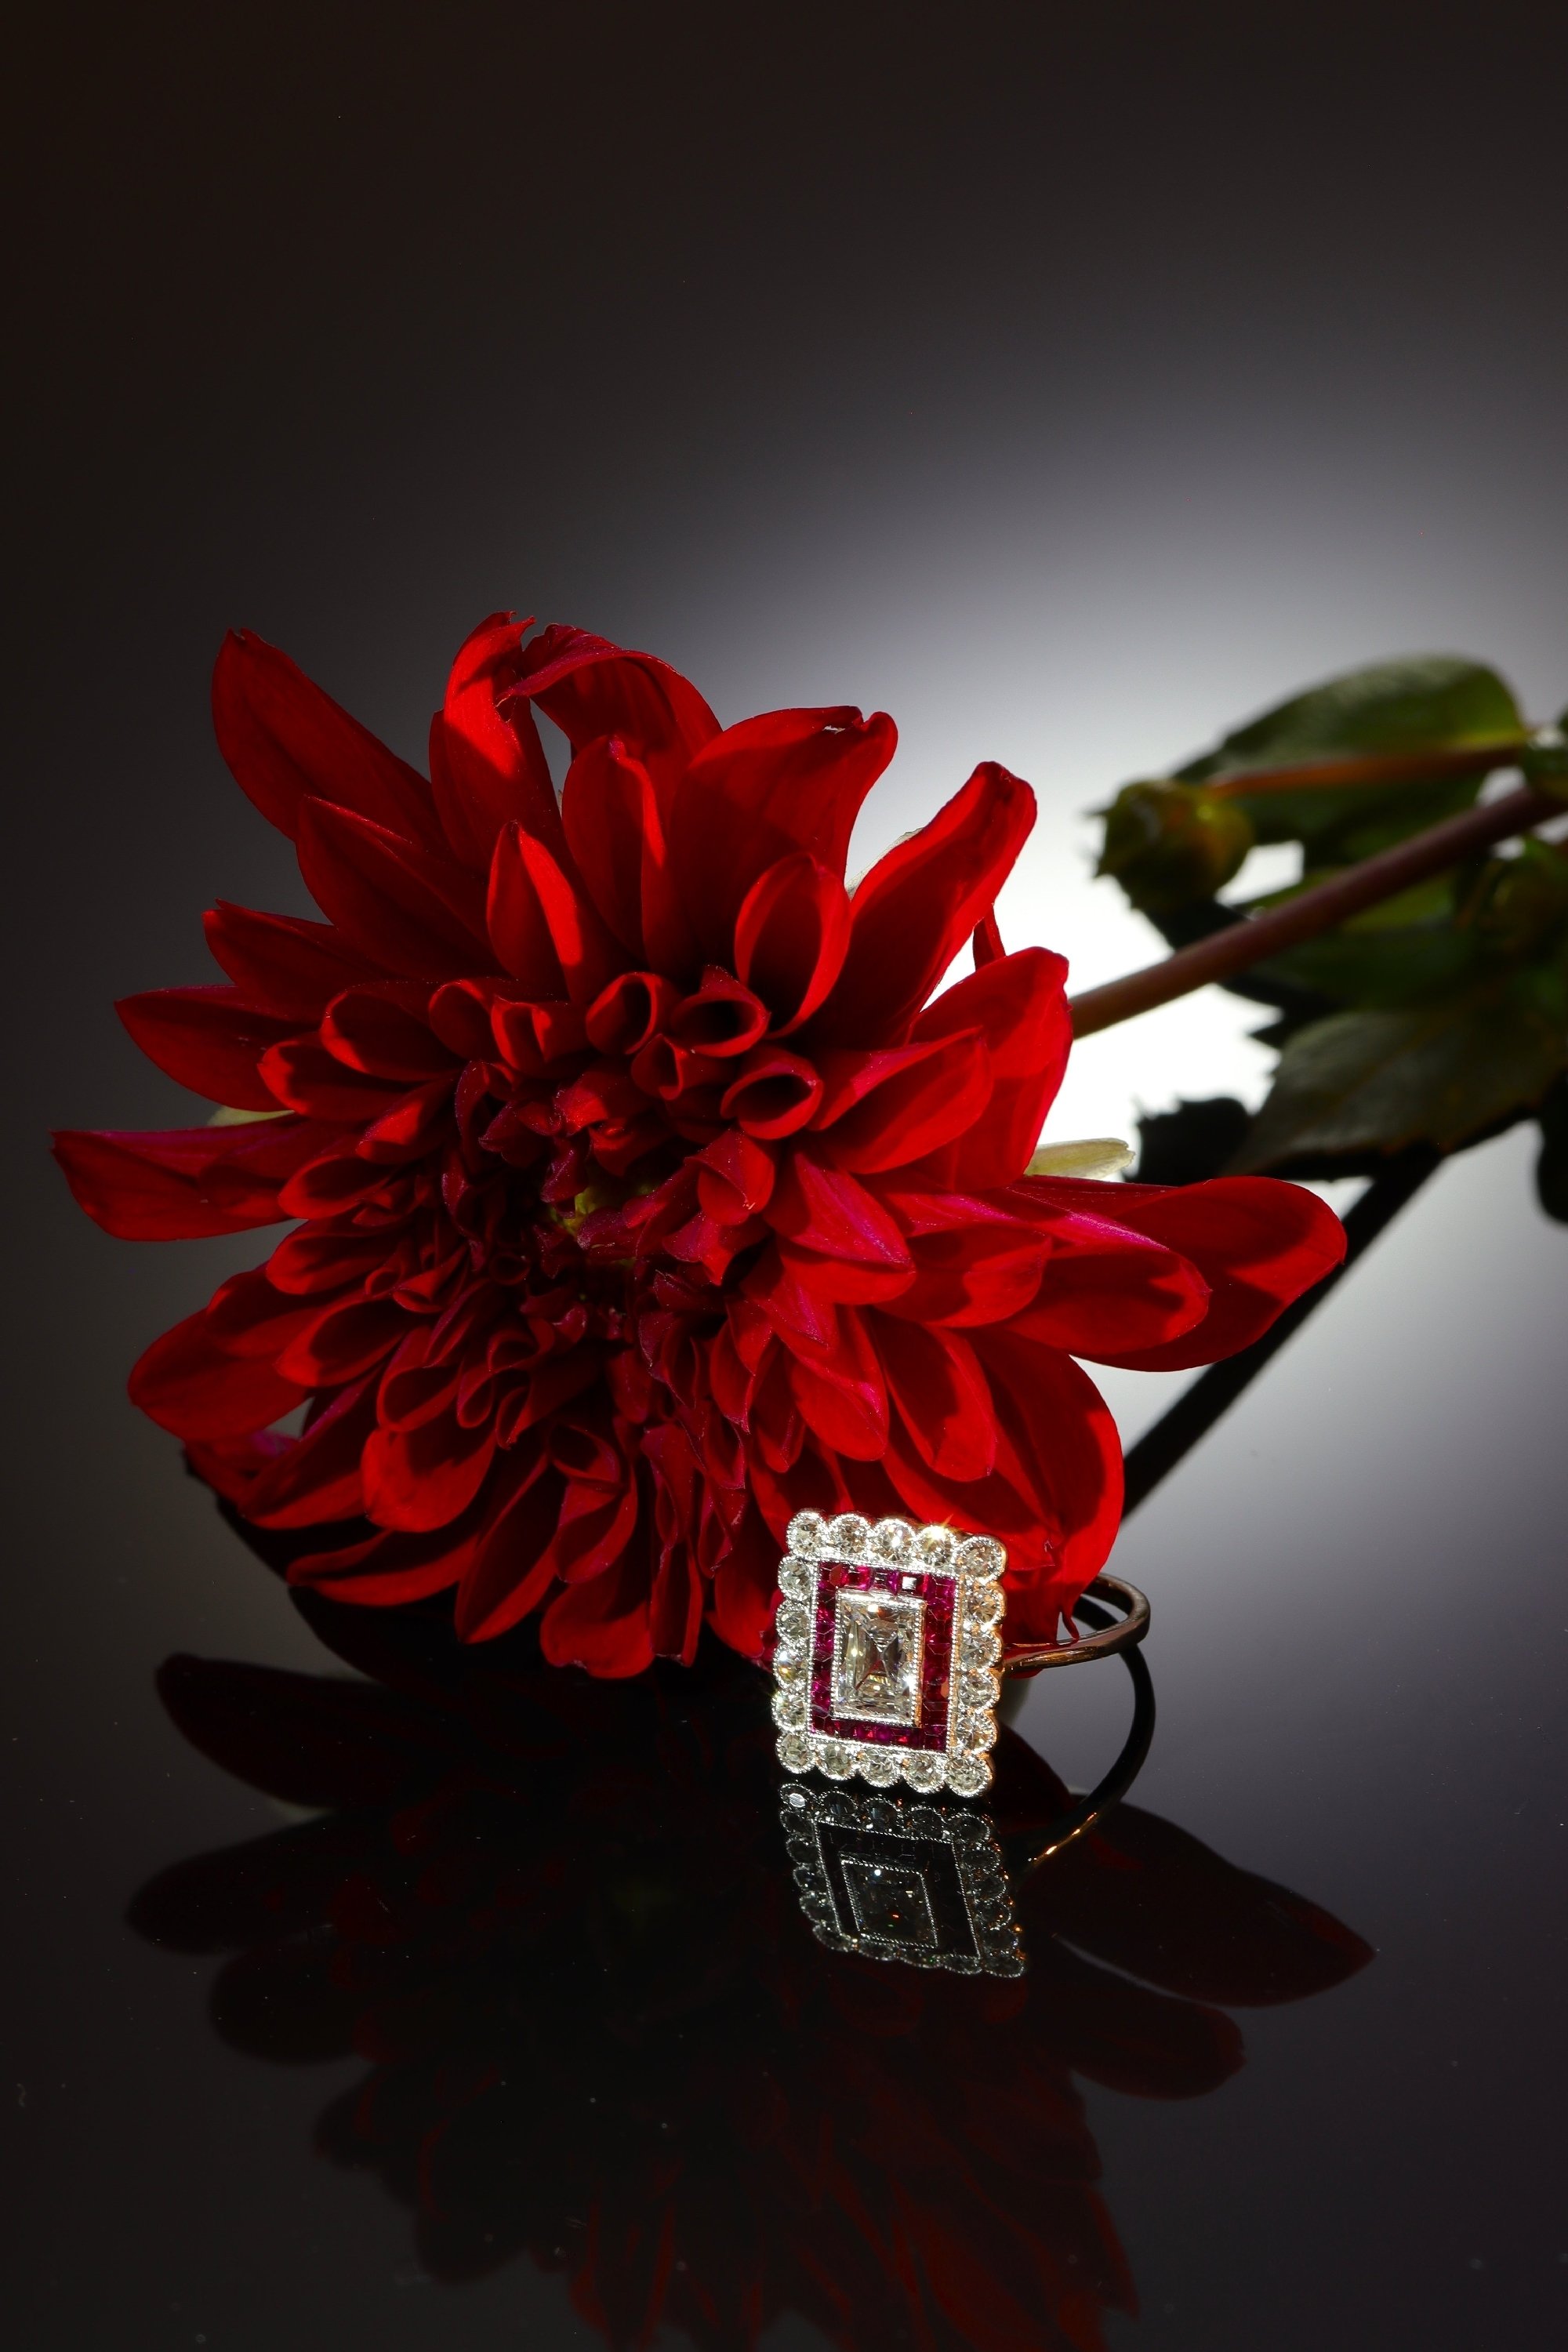 Click the picture to find out more about this vintage 1930's Art Deco diamond and ruby engagement ring